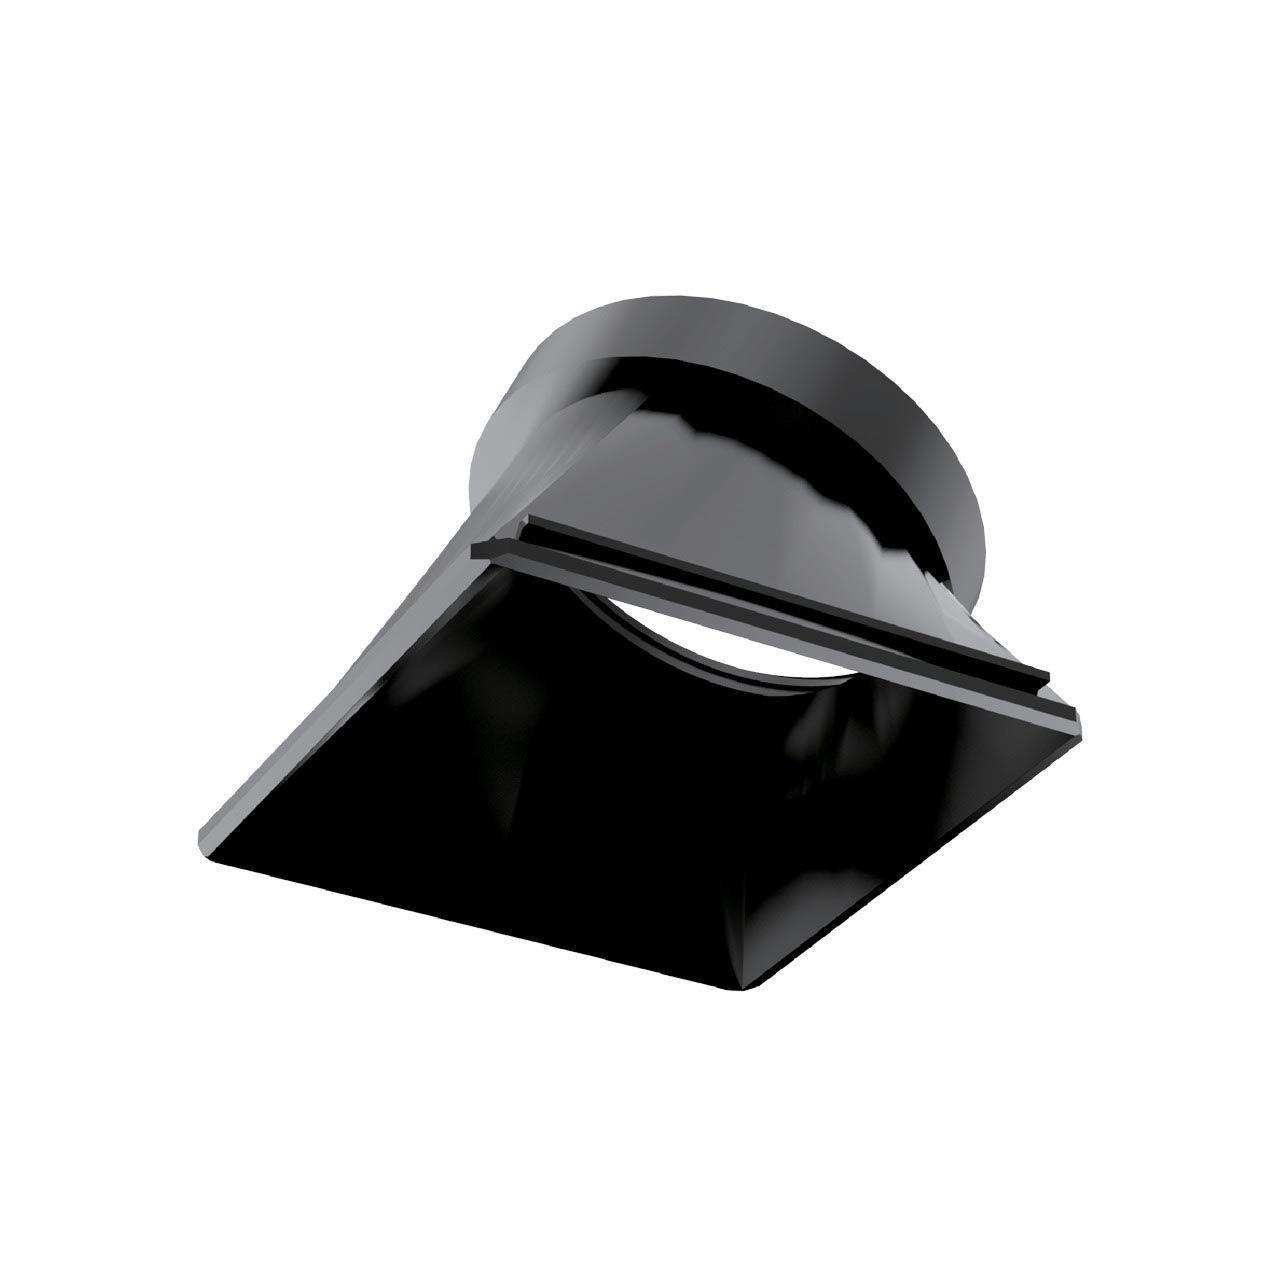 Рефлектор Ideal Lux Dynamic Reflector Square Slope Black